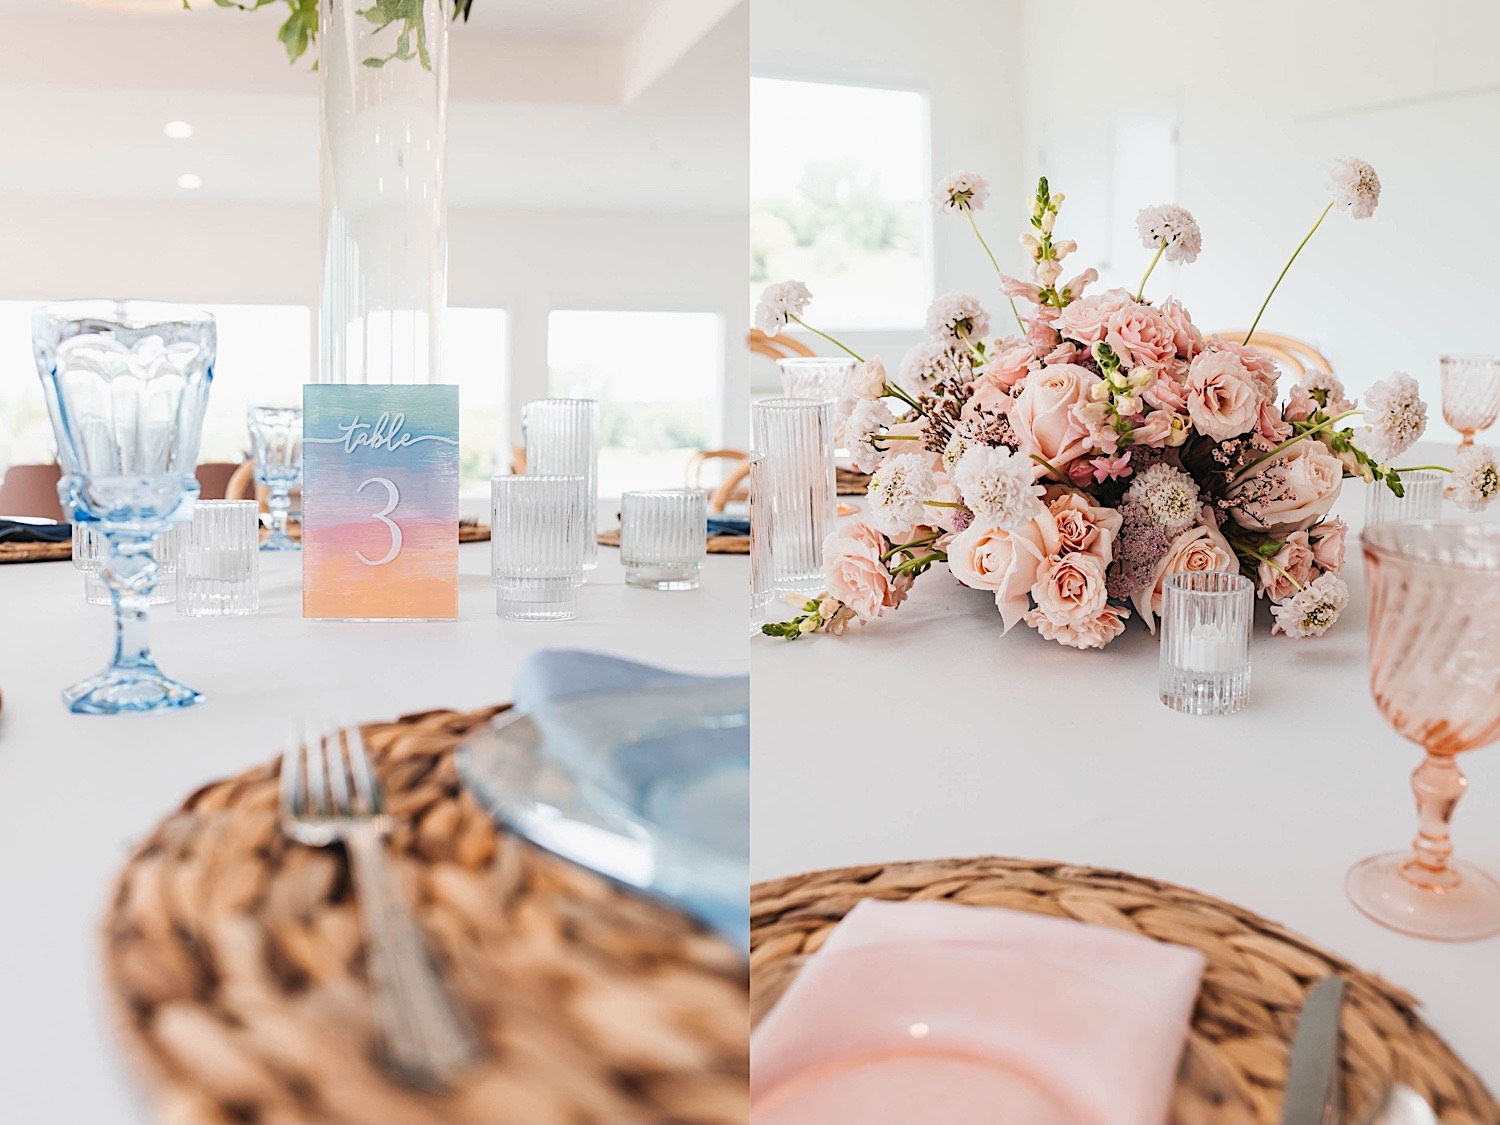 2 photos side by side, the left is of a table set up for a wedding reception, the right is of flowers sitting on a table for a wedding reception